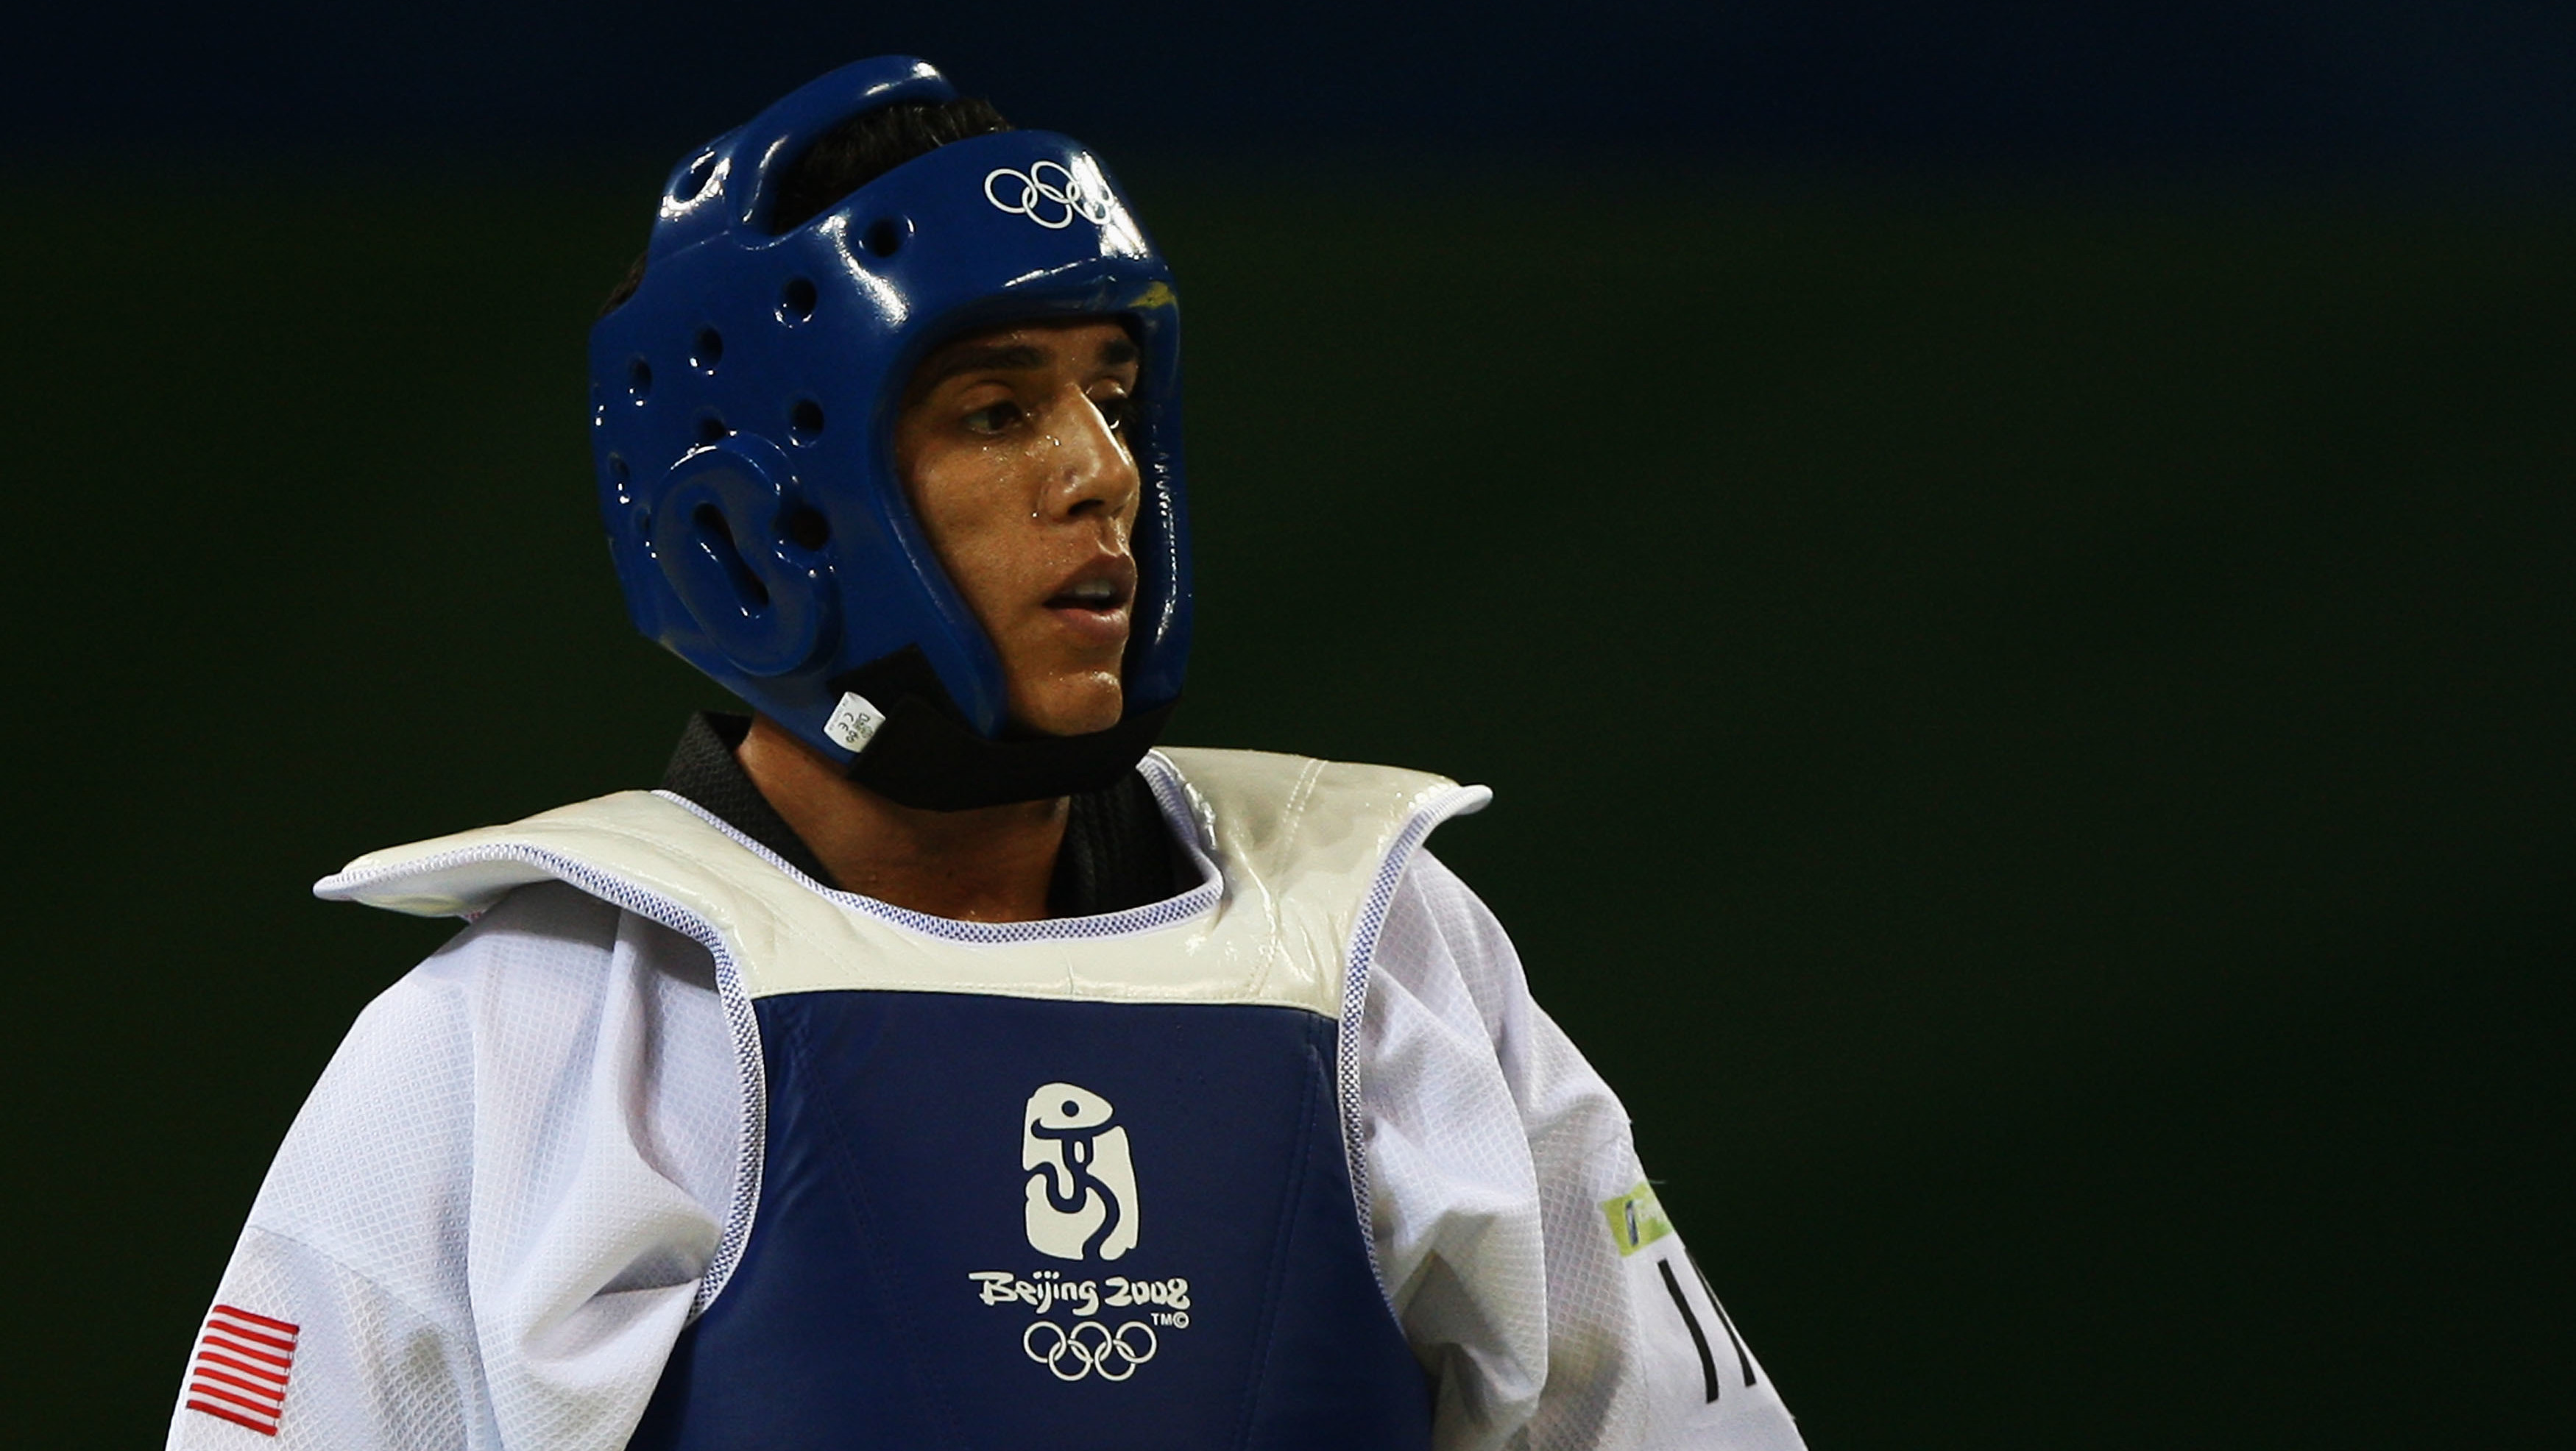 Decorated Taekwondo Athlete Steven Lopez Temporarily Barred Amid Assault Claims hq picture